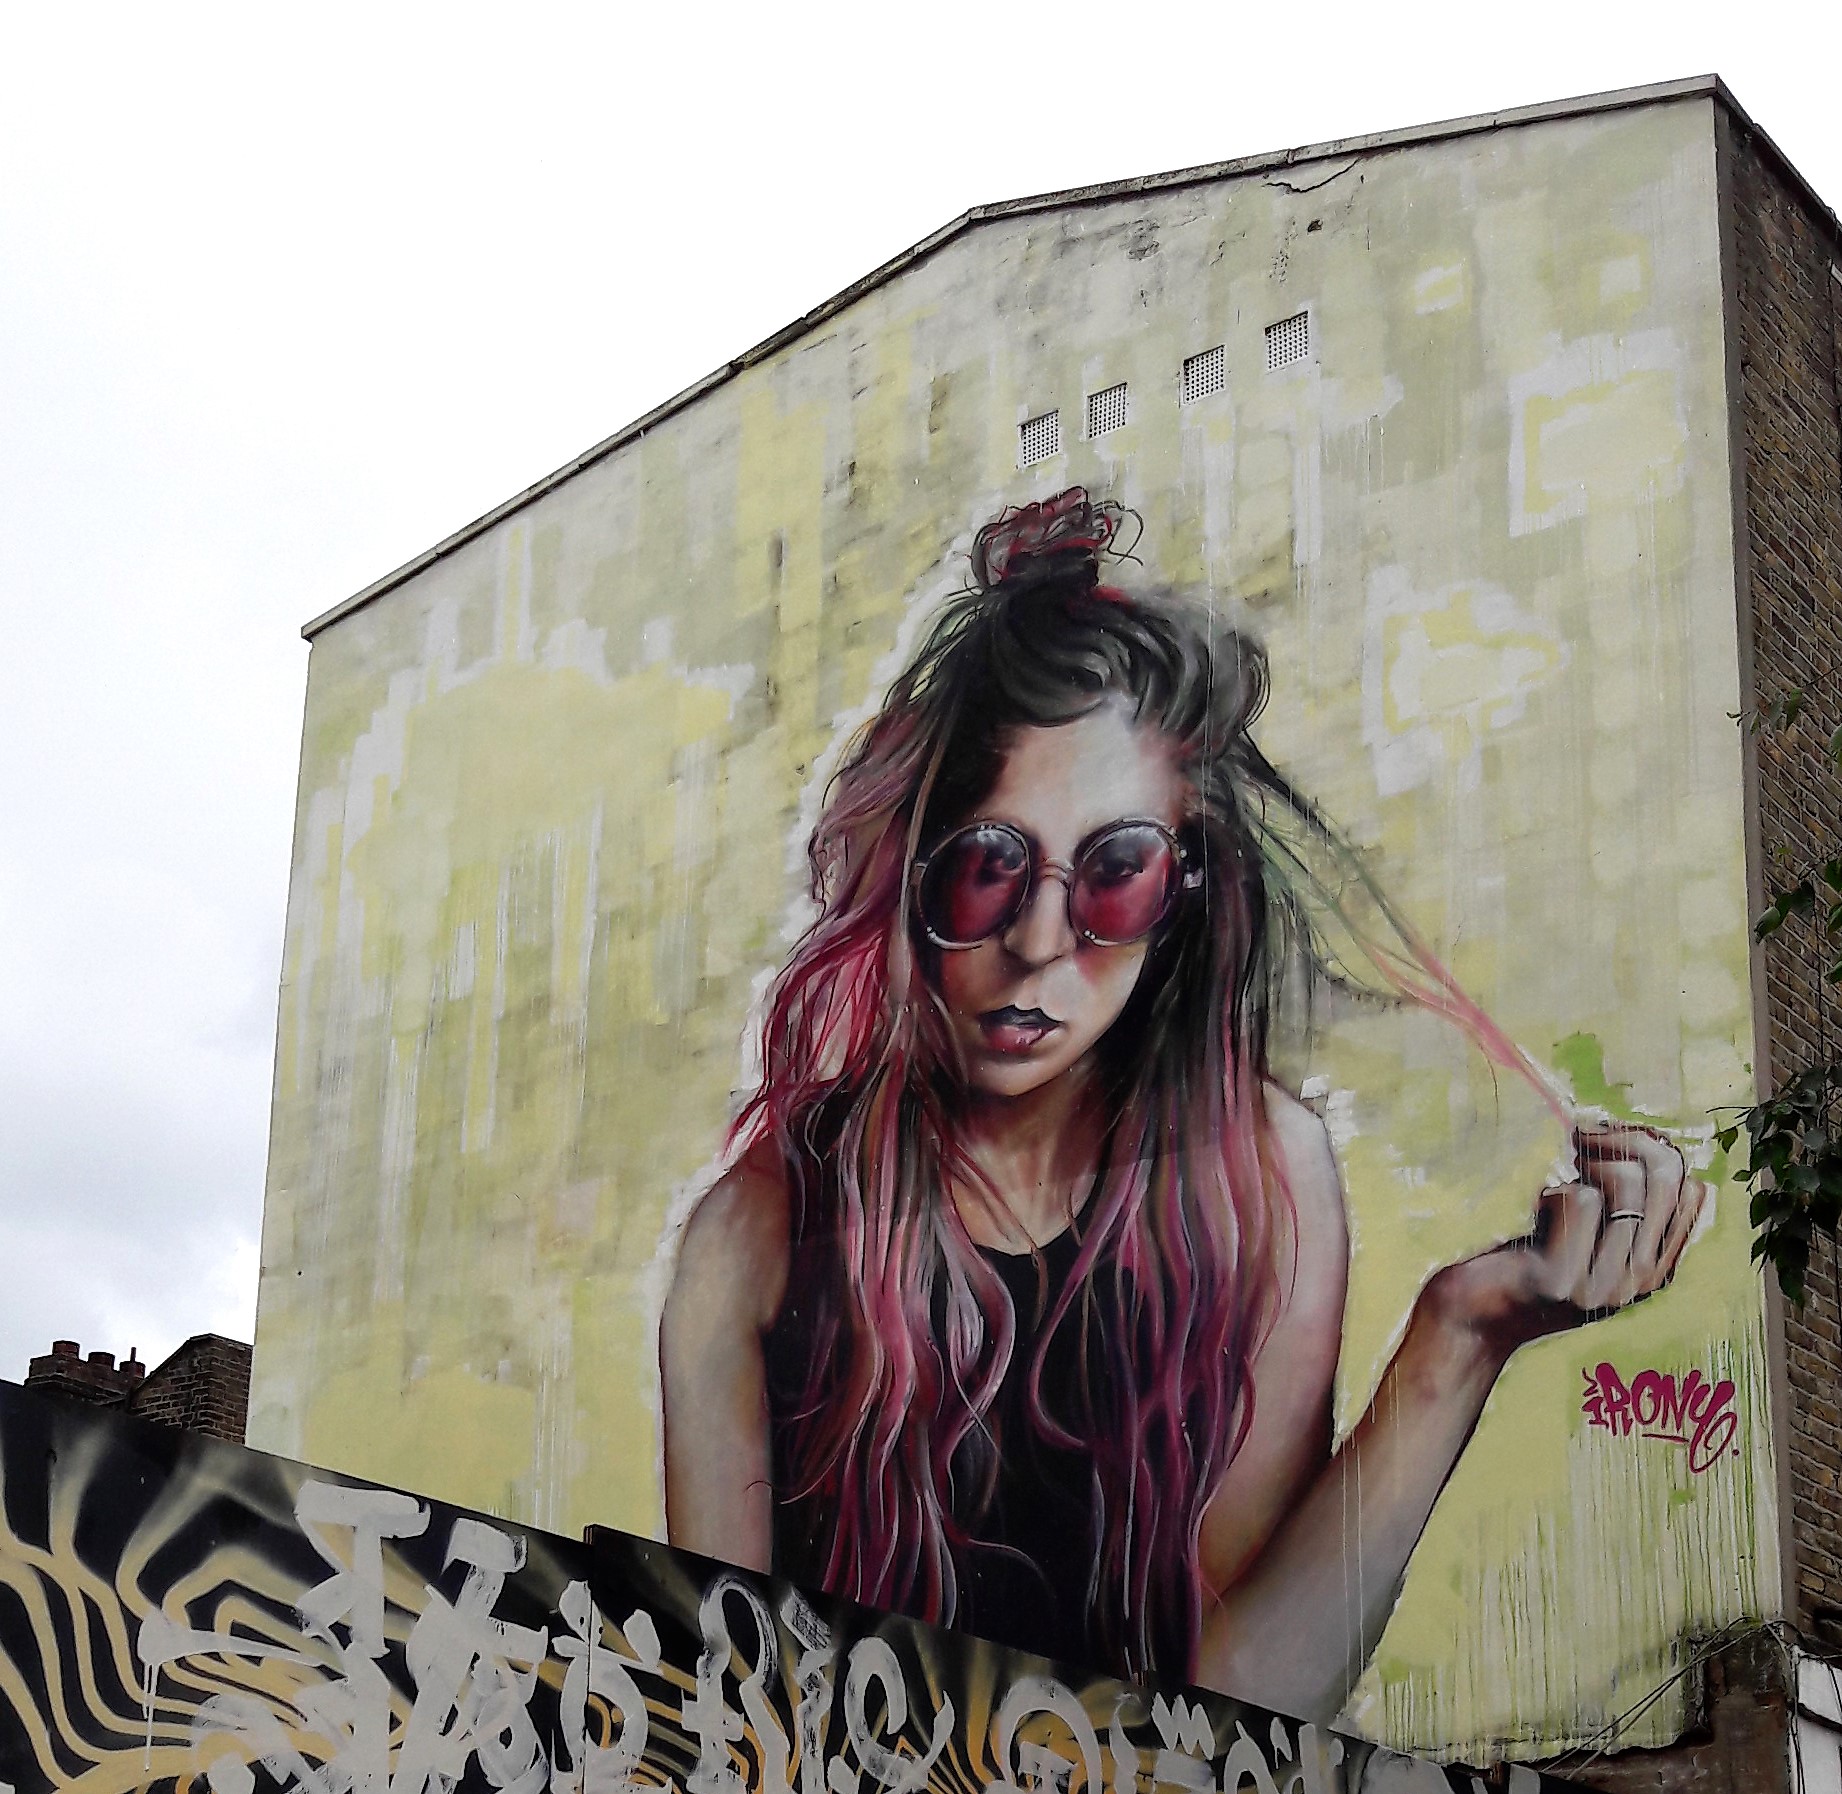 Graffiti 6541  by the artist IRONY captured by Mephisroth in London United Kingdom